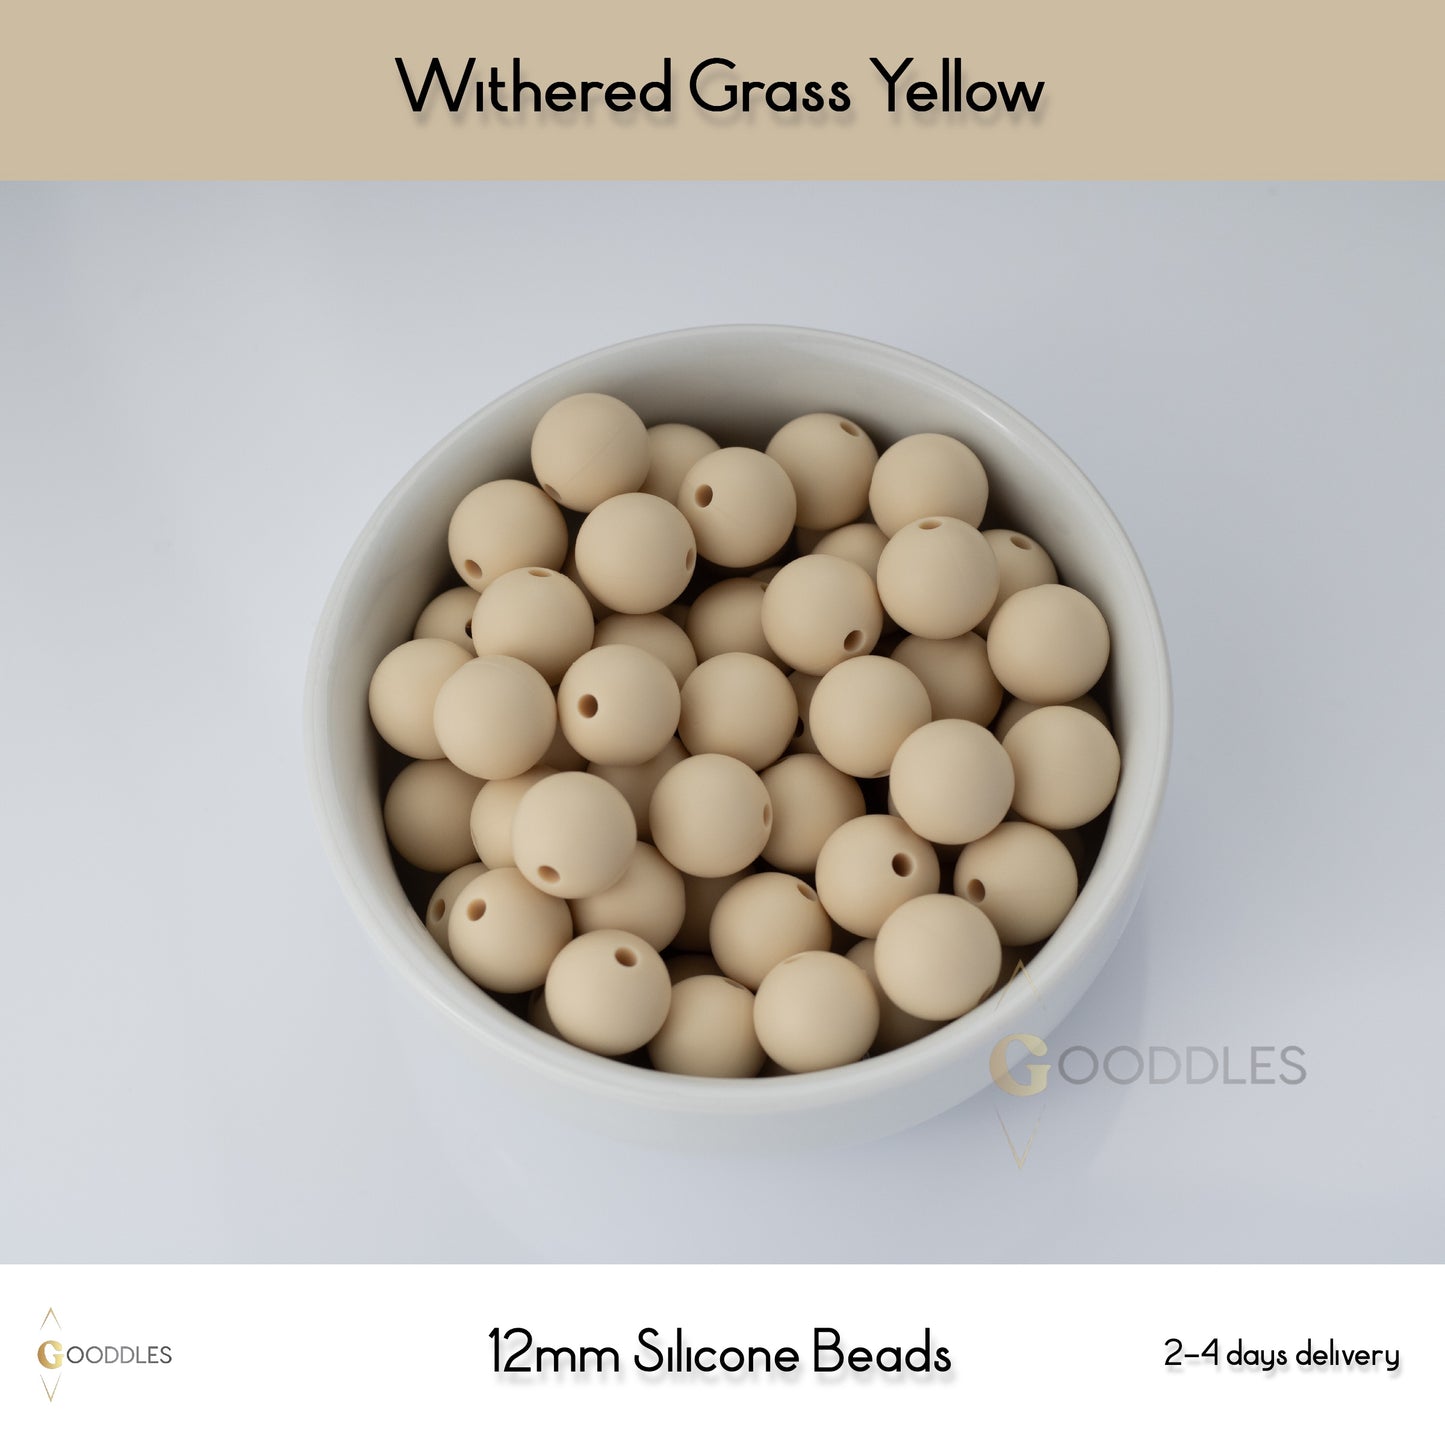 5pcs, Withered Grass Yellow Silicone Beads Round Silicone Beads